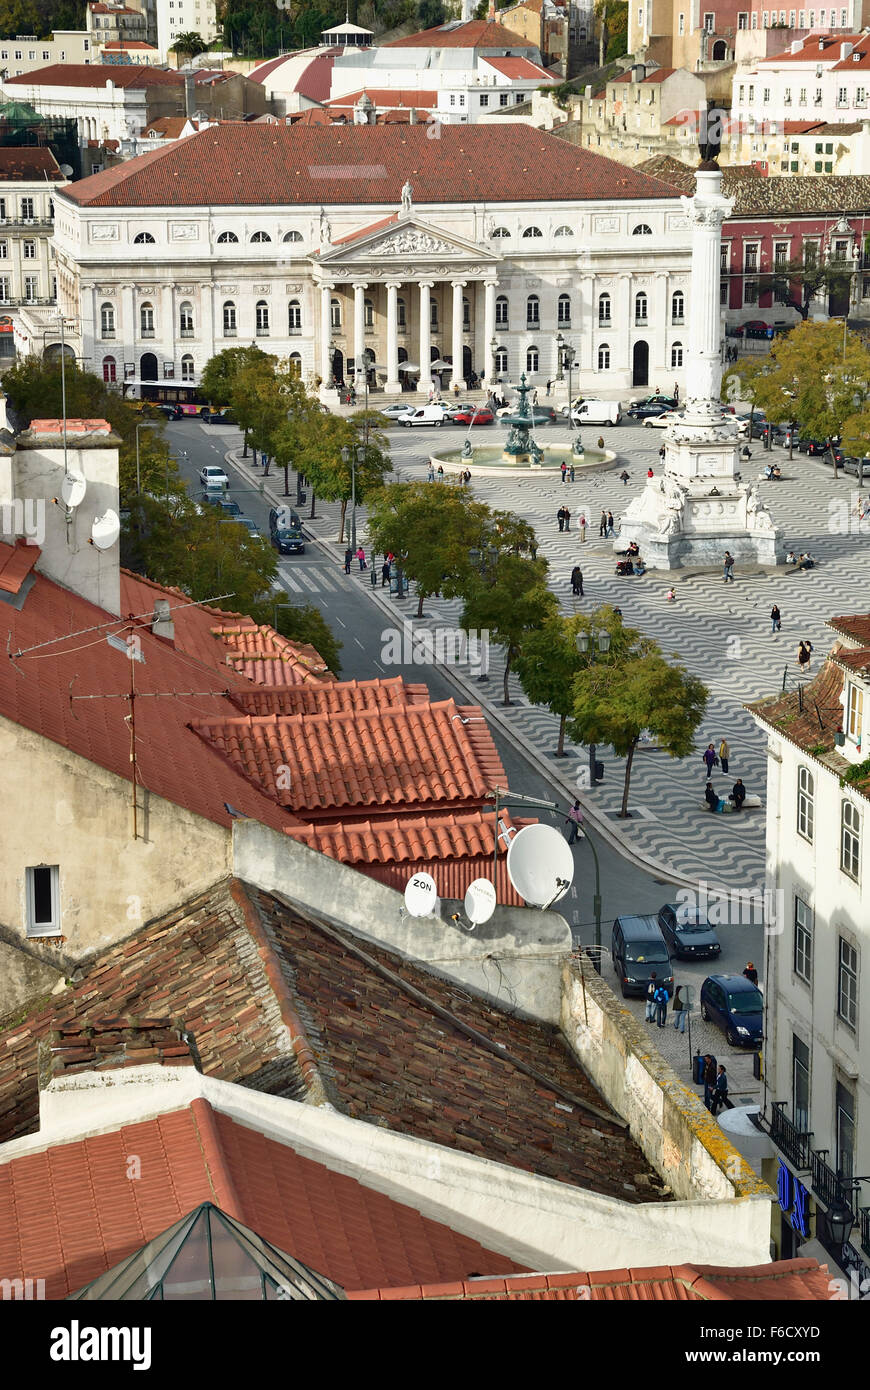 View of Rossio Square and Maria II Theatre, seen from Santa Justa elevador. Lisbon, Portugal. Europe Stock Photo